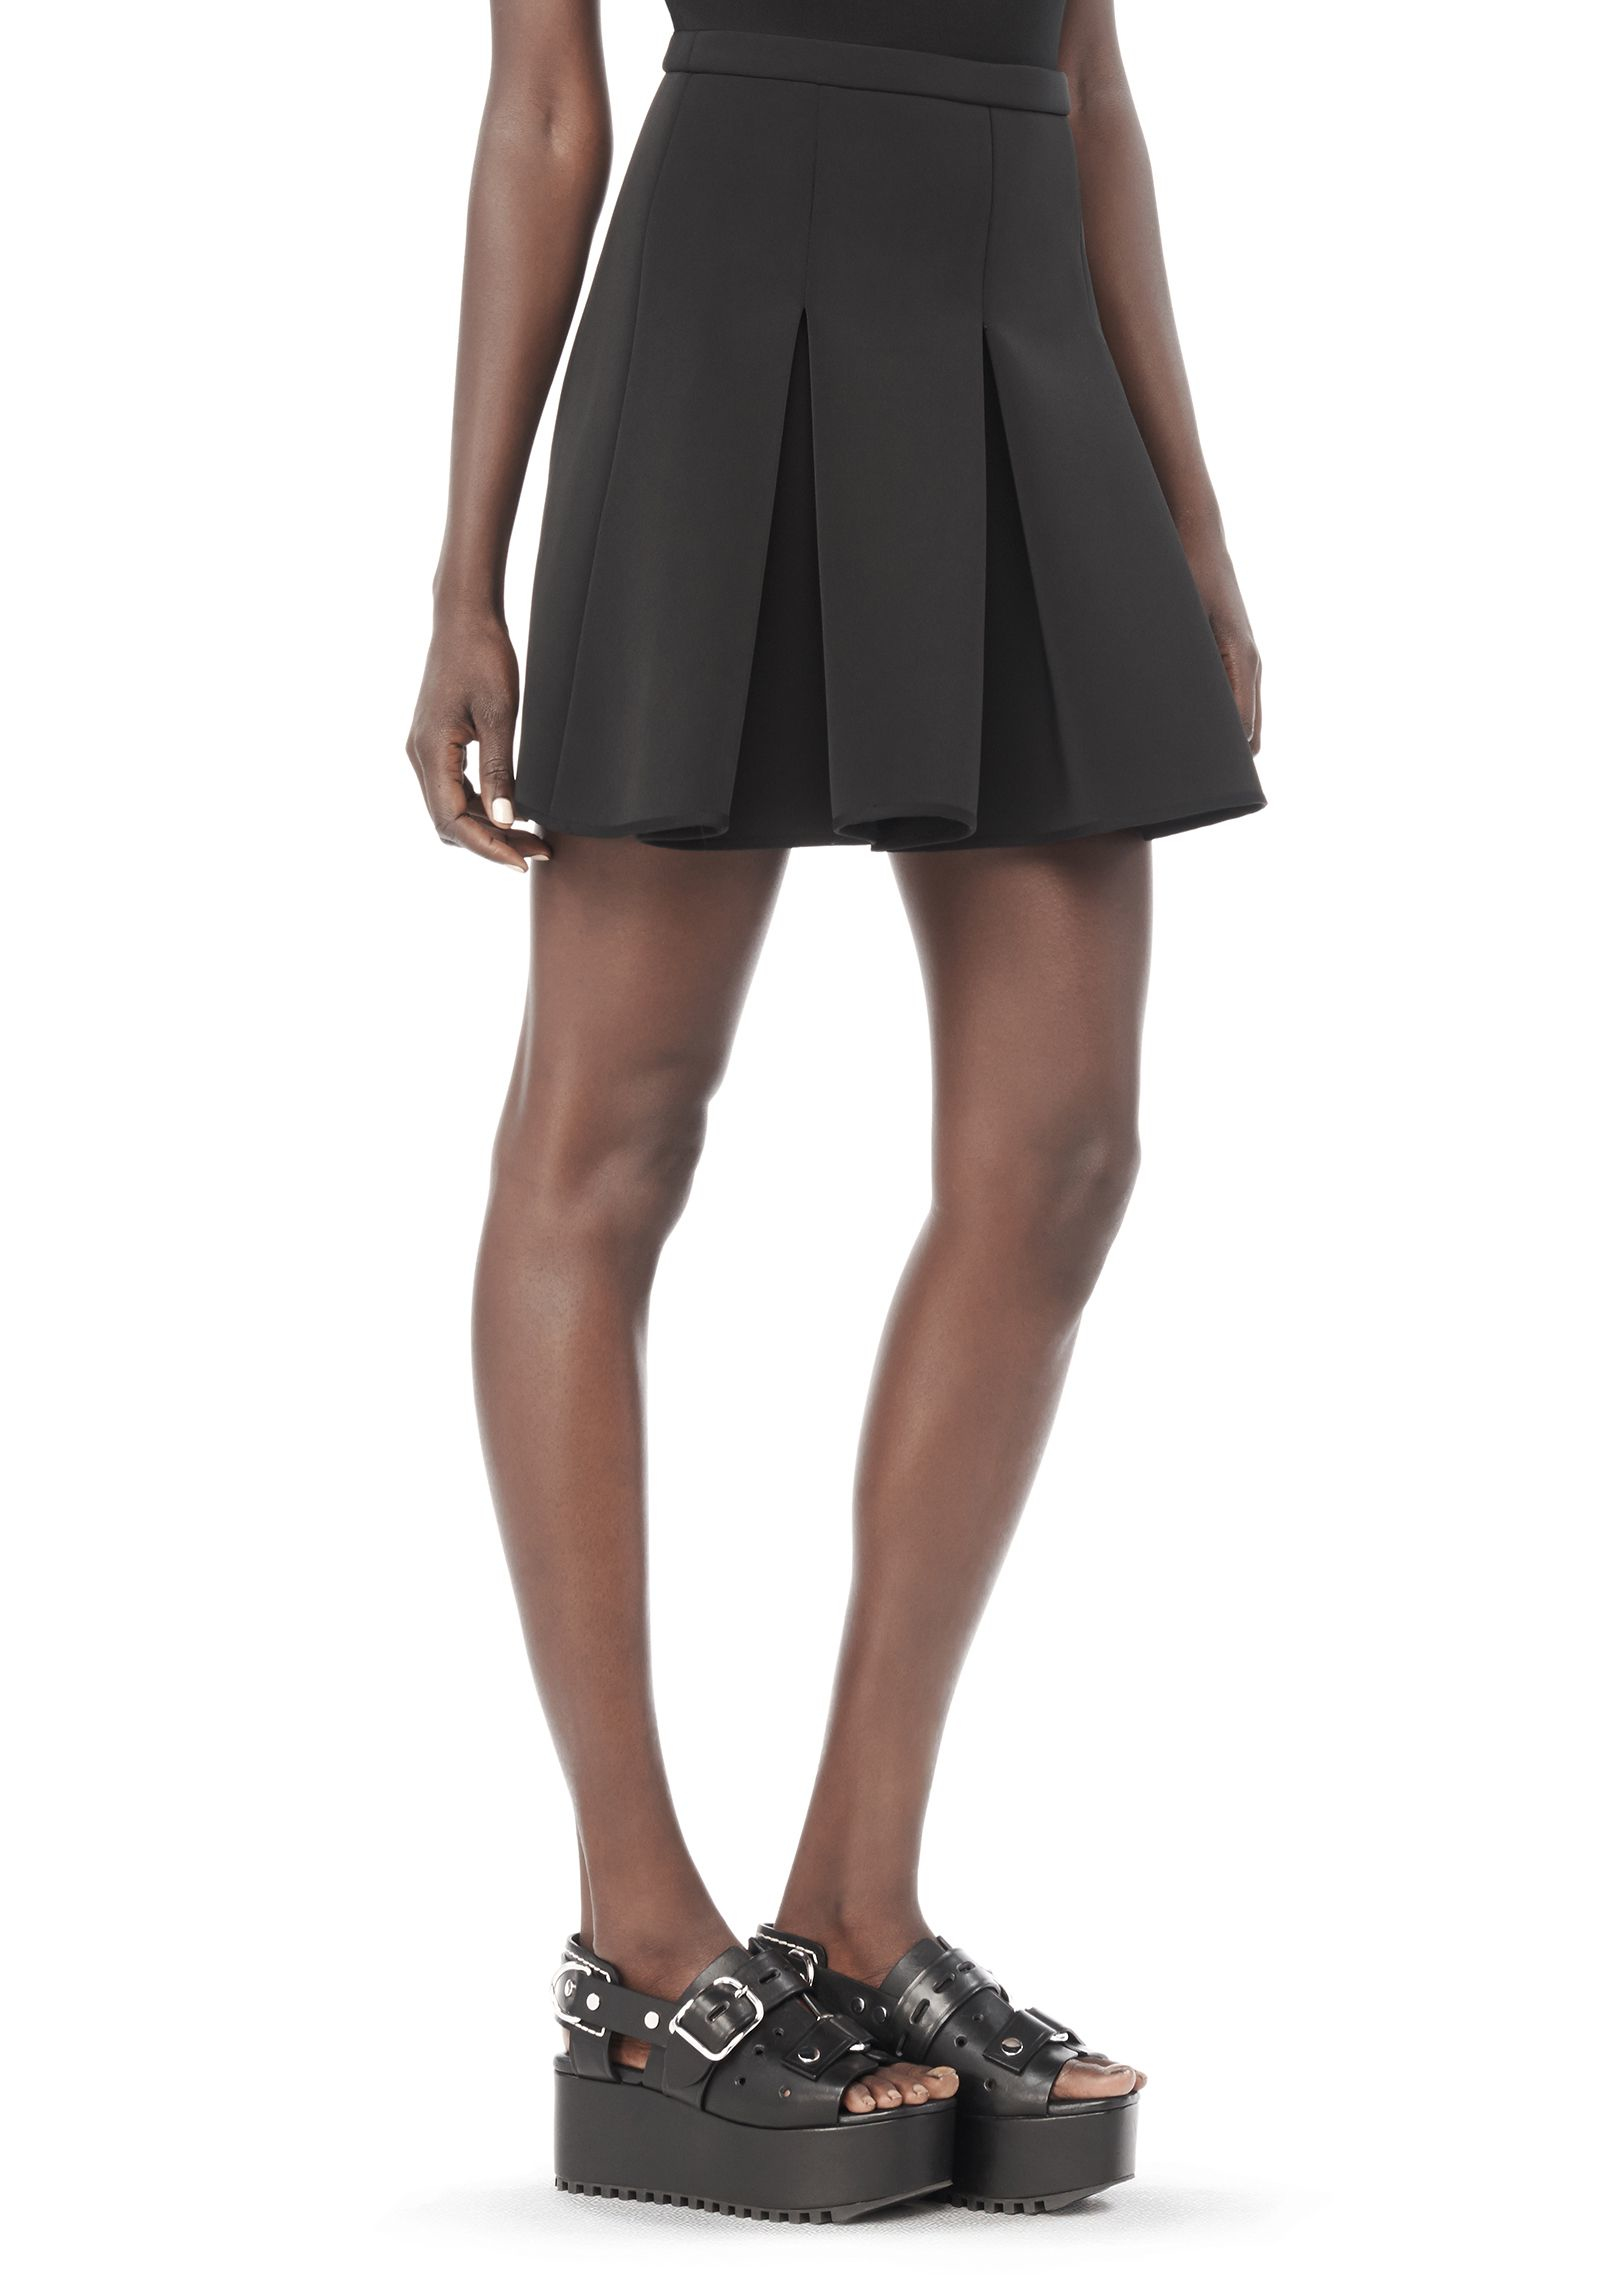 Lyst - Alexander Wang Inverted Pleat-front Mini Skirt in Black